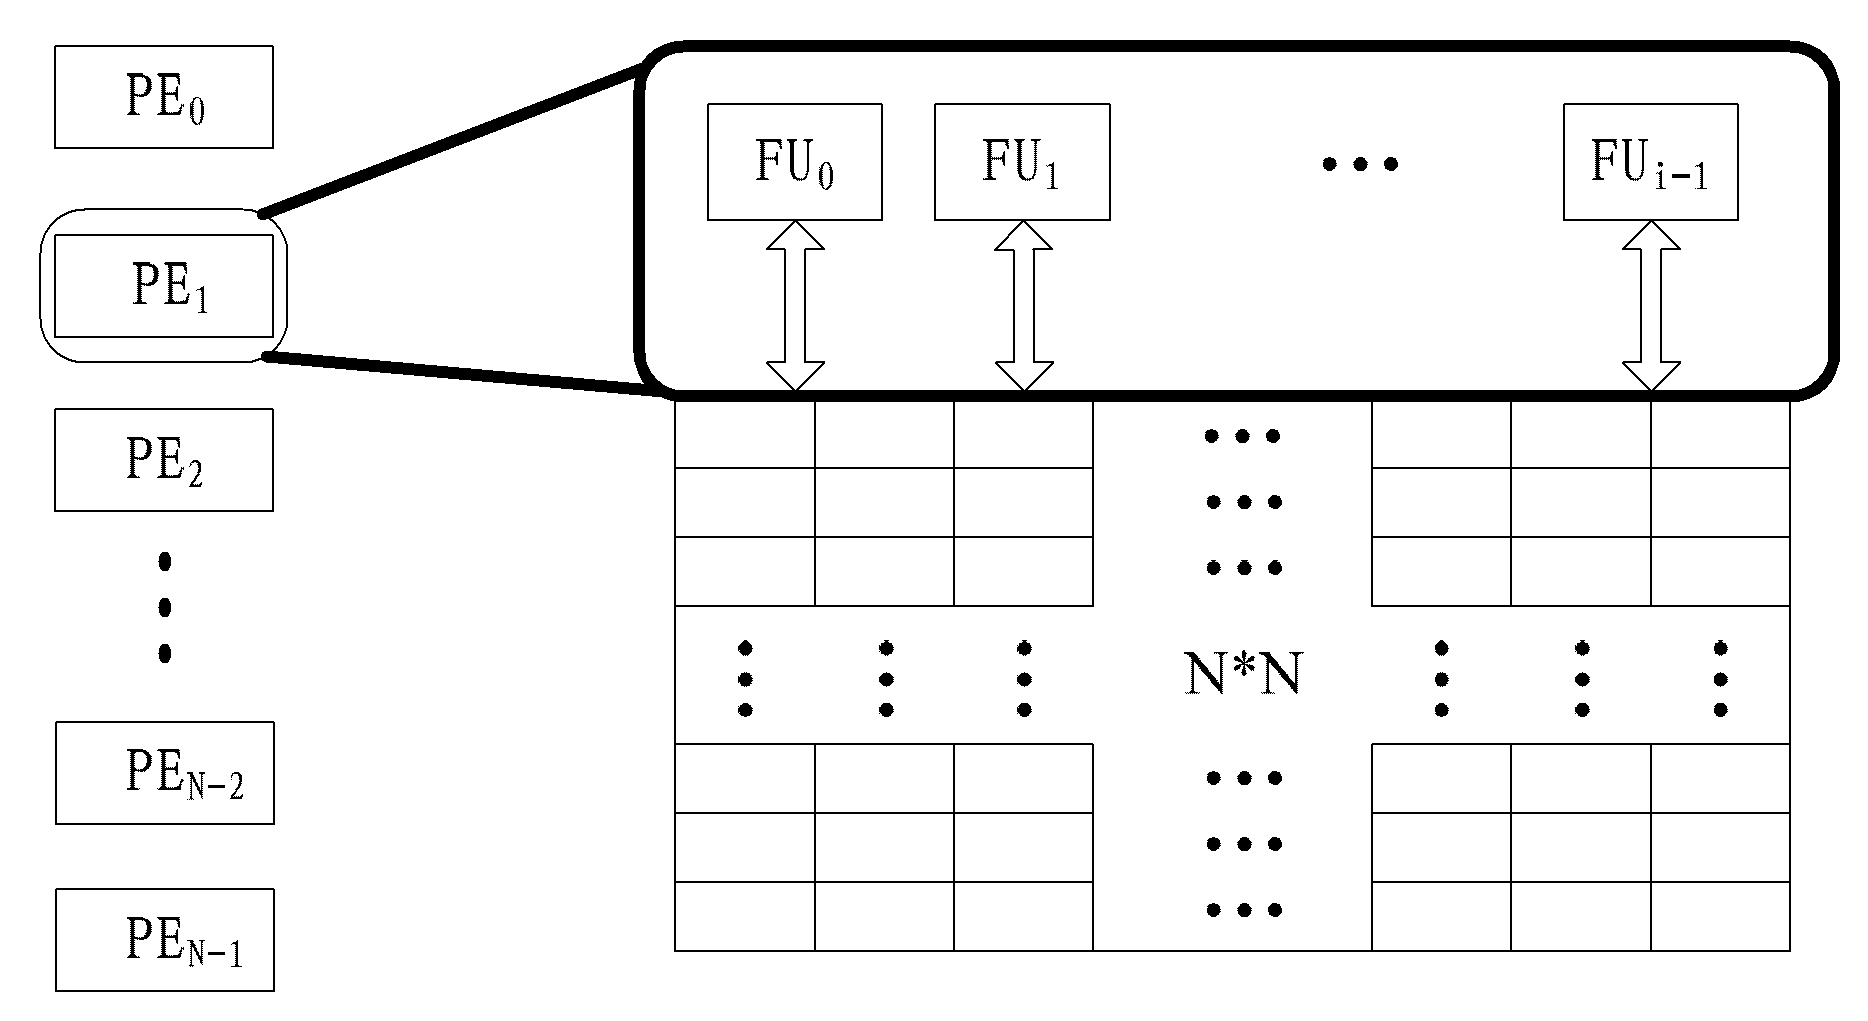 Configurable matrix register unit for supporting multi-width SIMD and multi-granularity SIMT